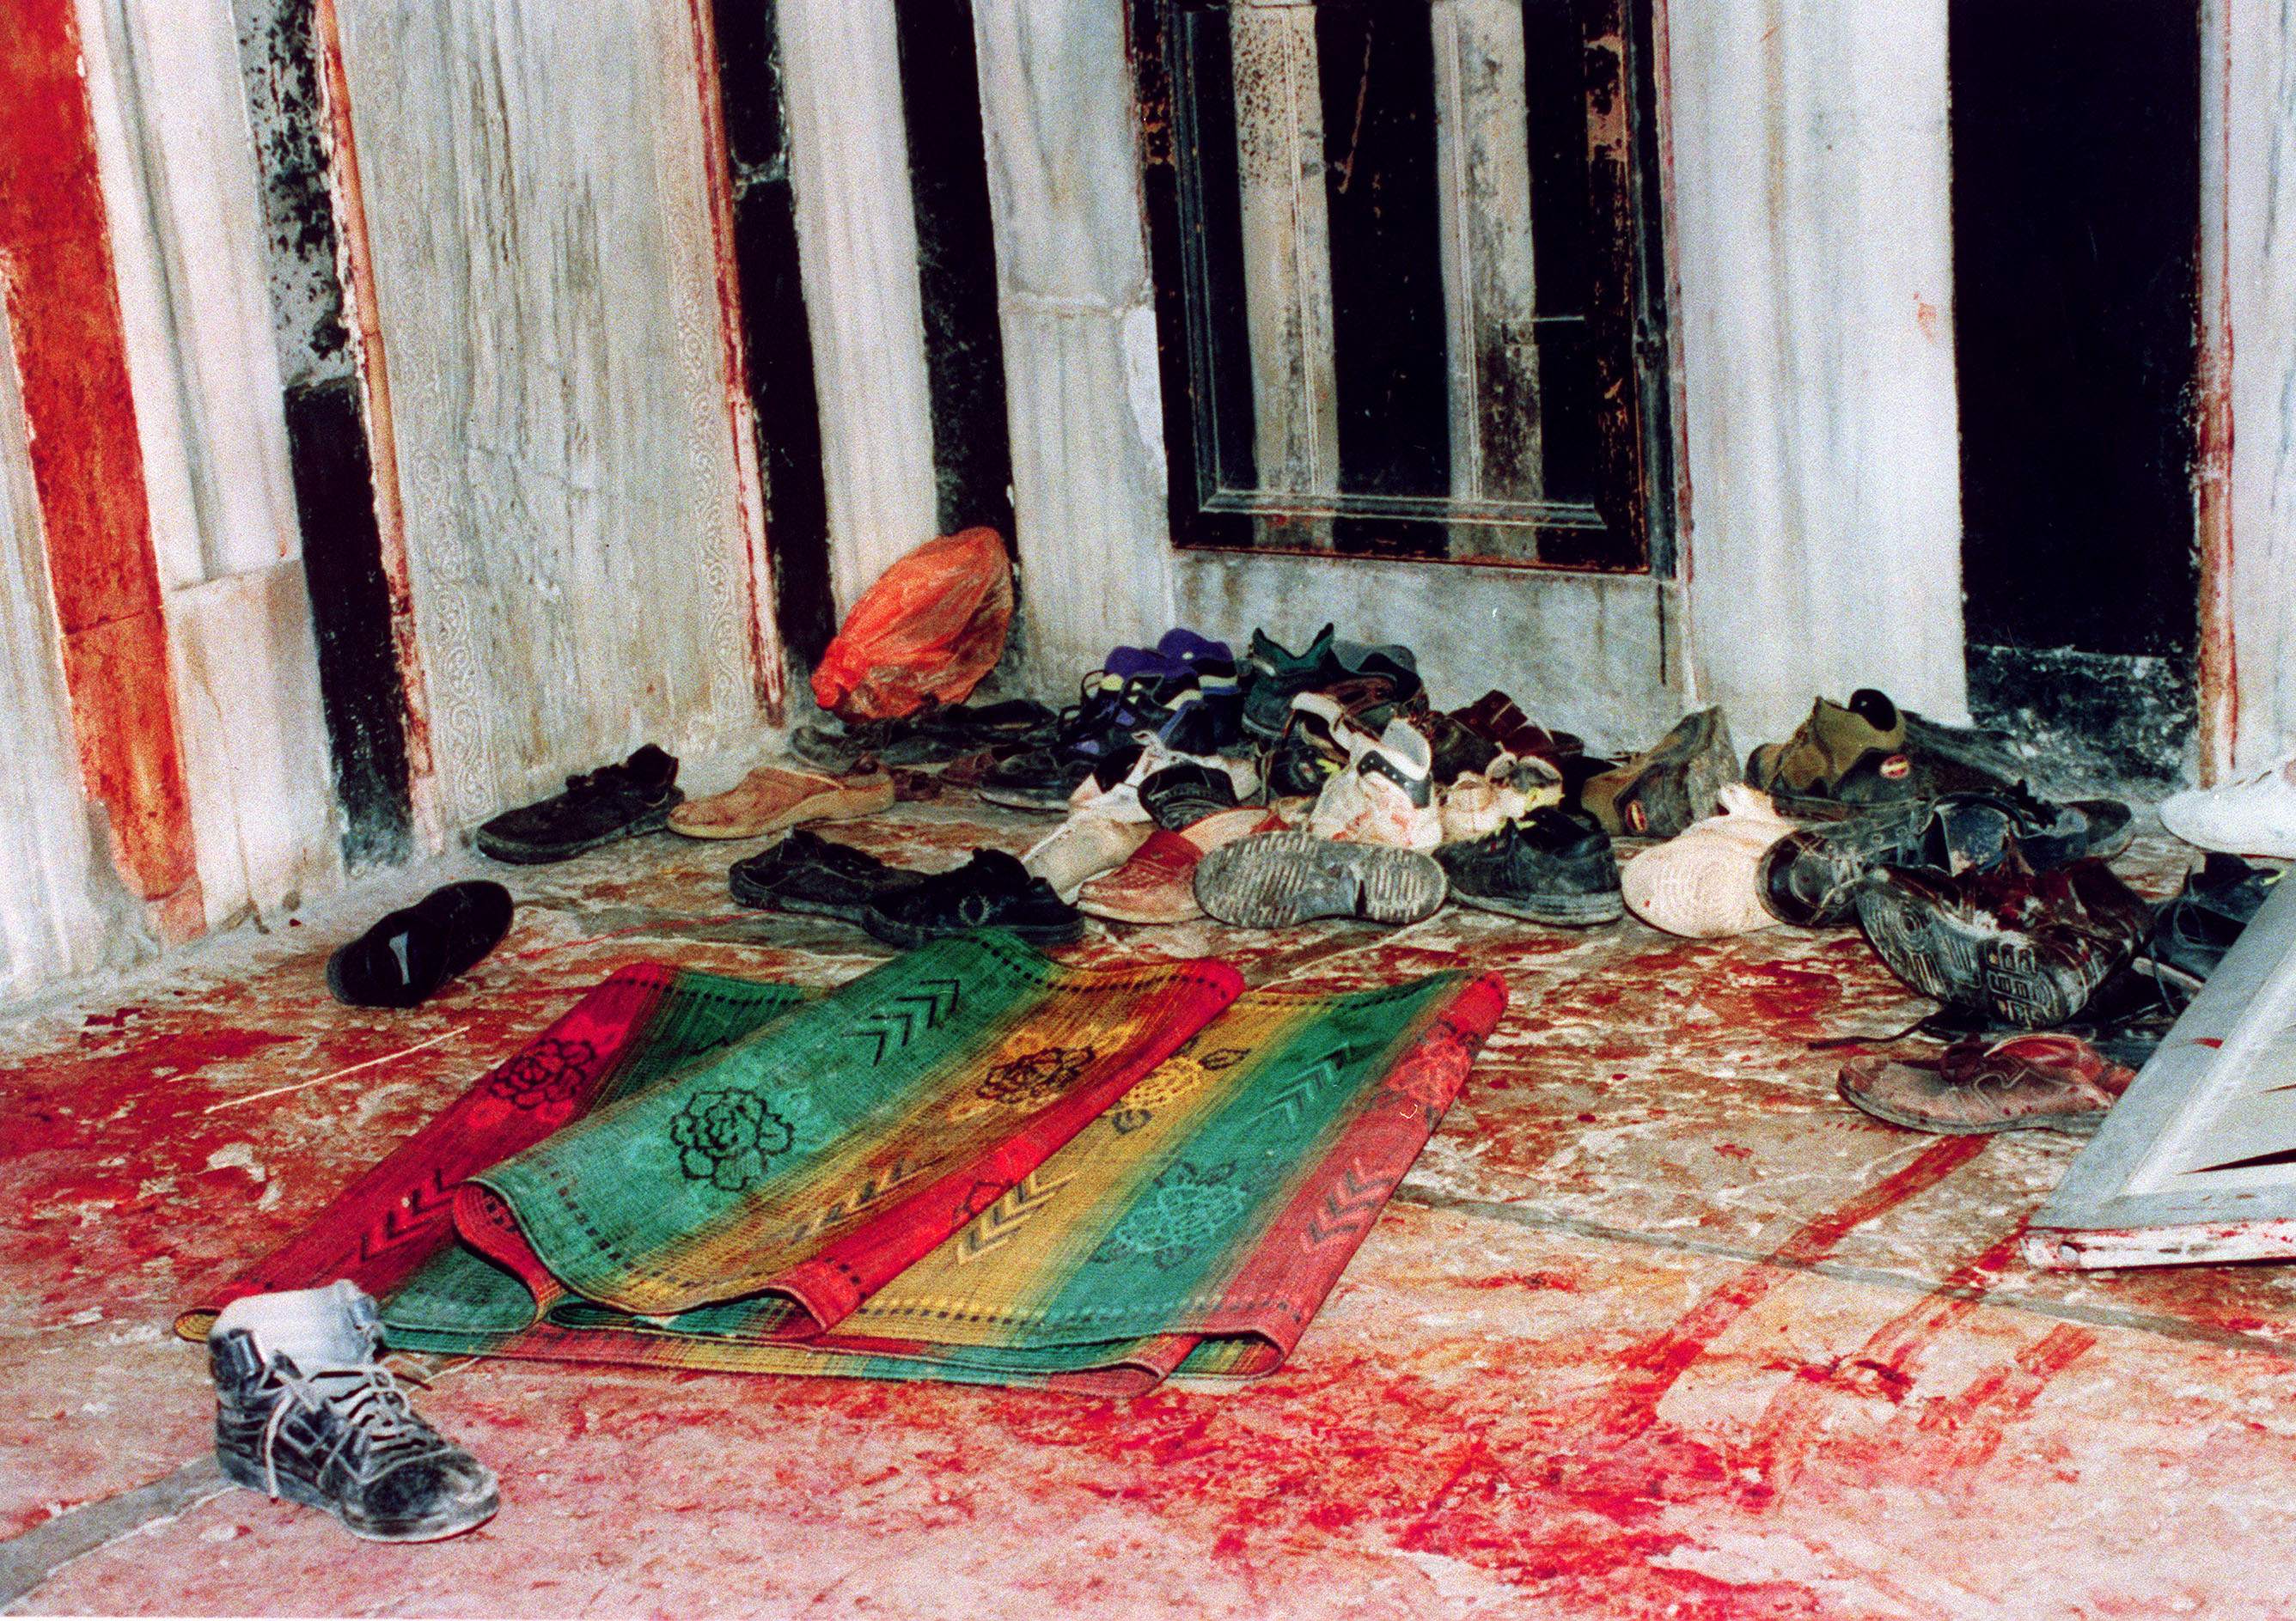 The aftermath of the Ibrahimi mosque massacre Hebron on 25 February 1994 (AFP)